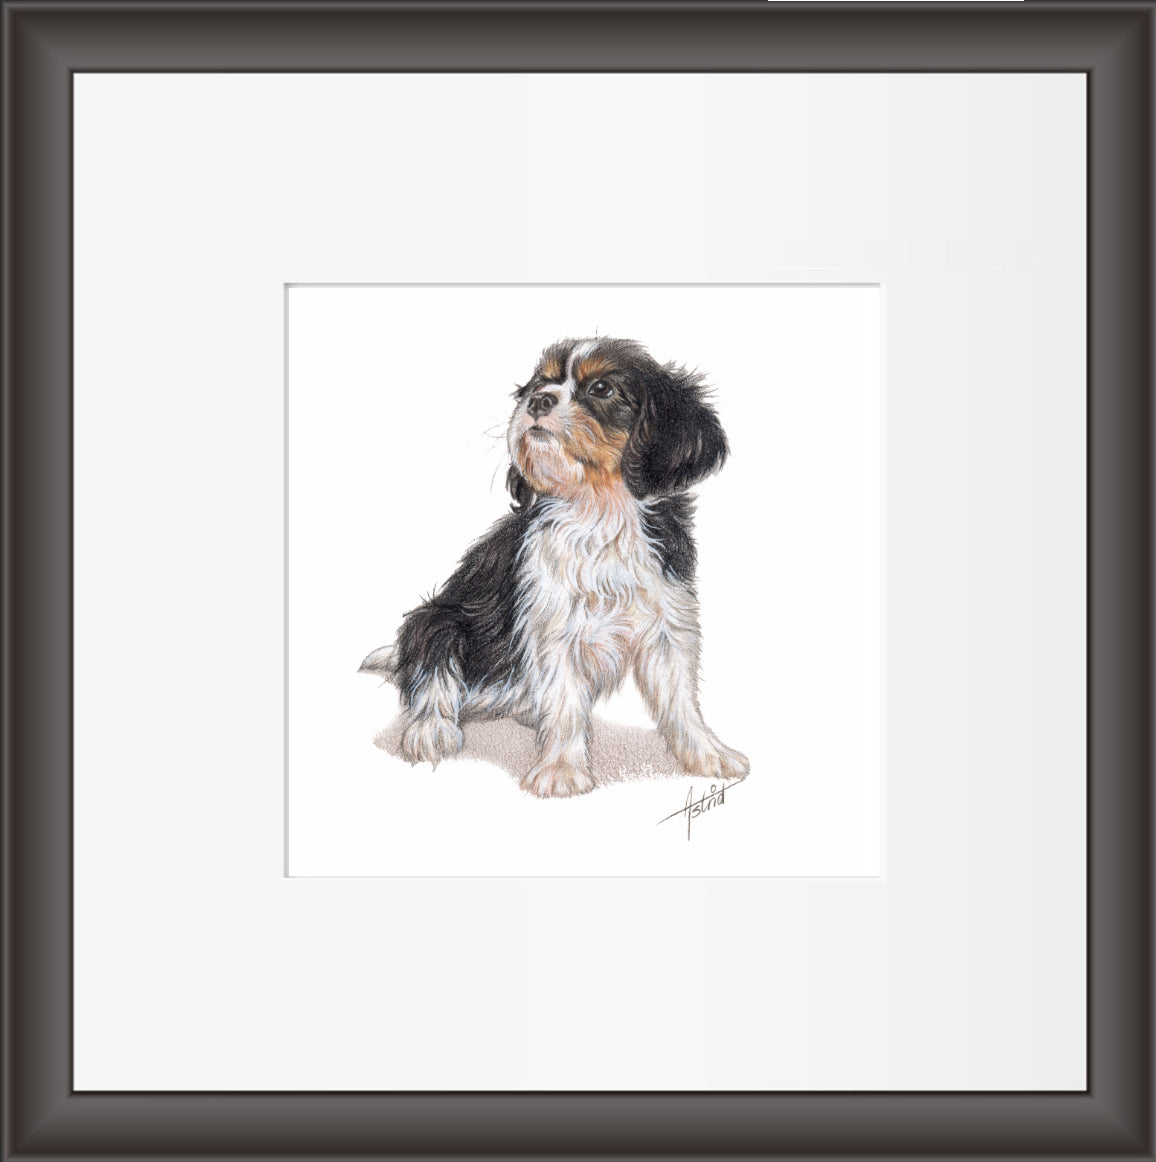 Reproduktion "Cavalier King Charles Terrier".